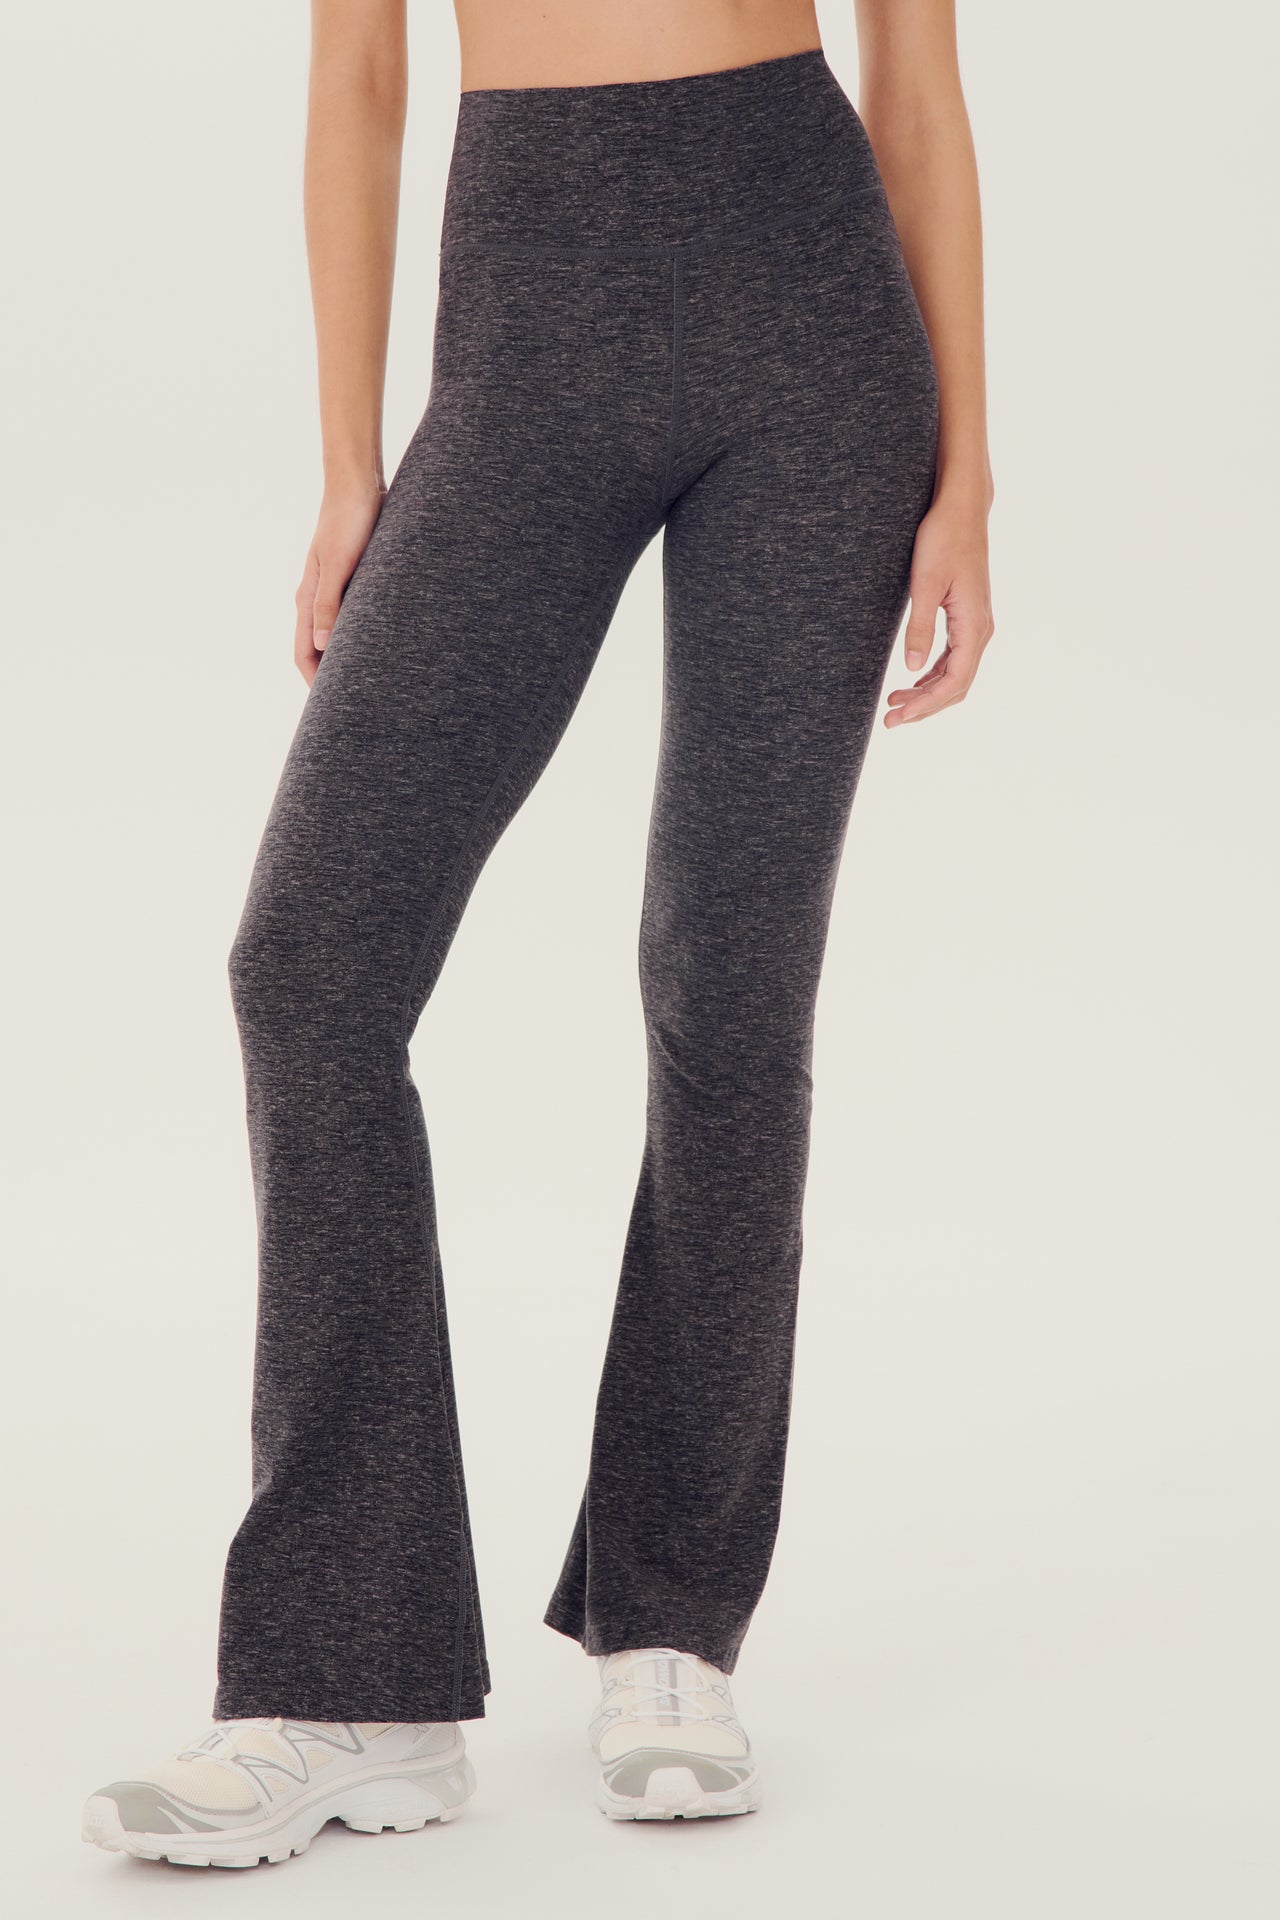 A woman wearing grey SPLITS59 Raquel High Waist Airweight Flare leggings and a white top.